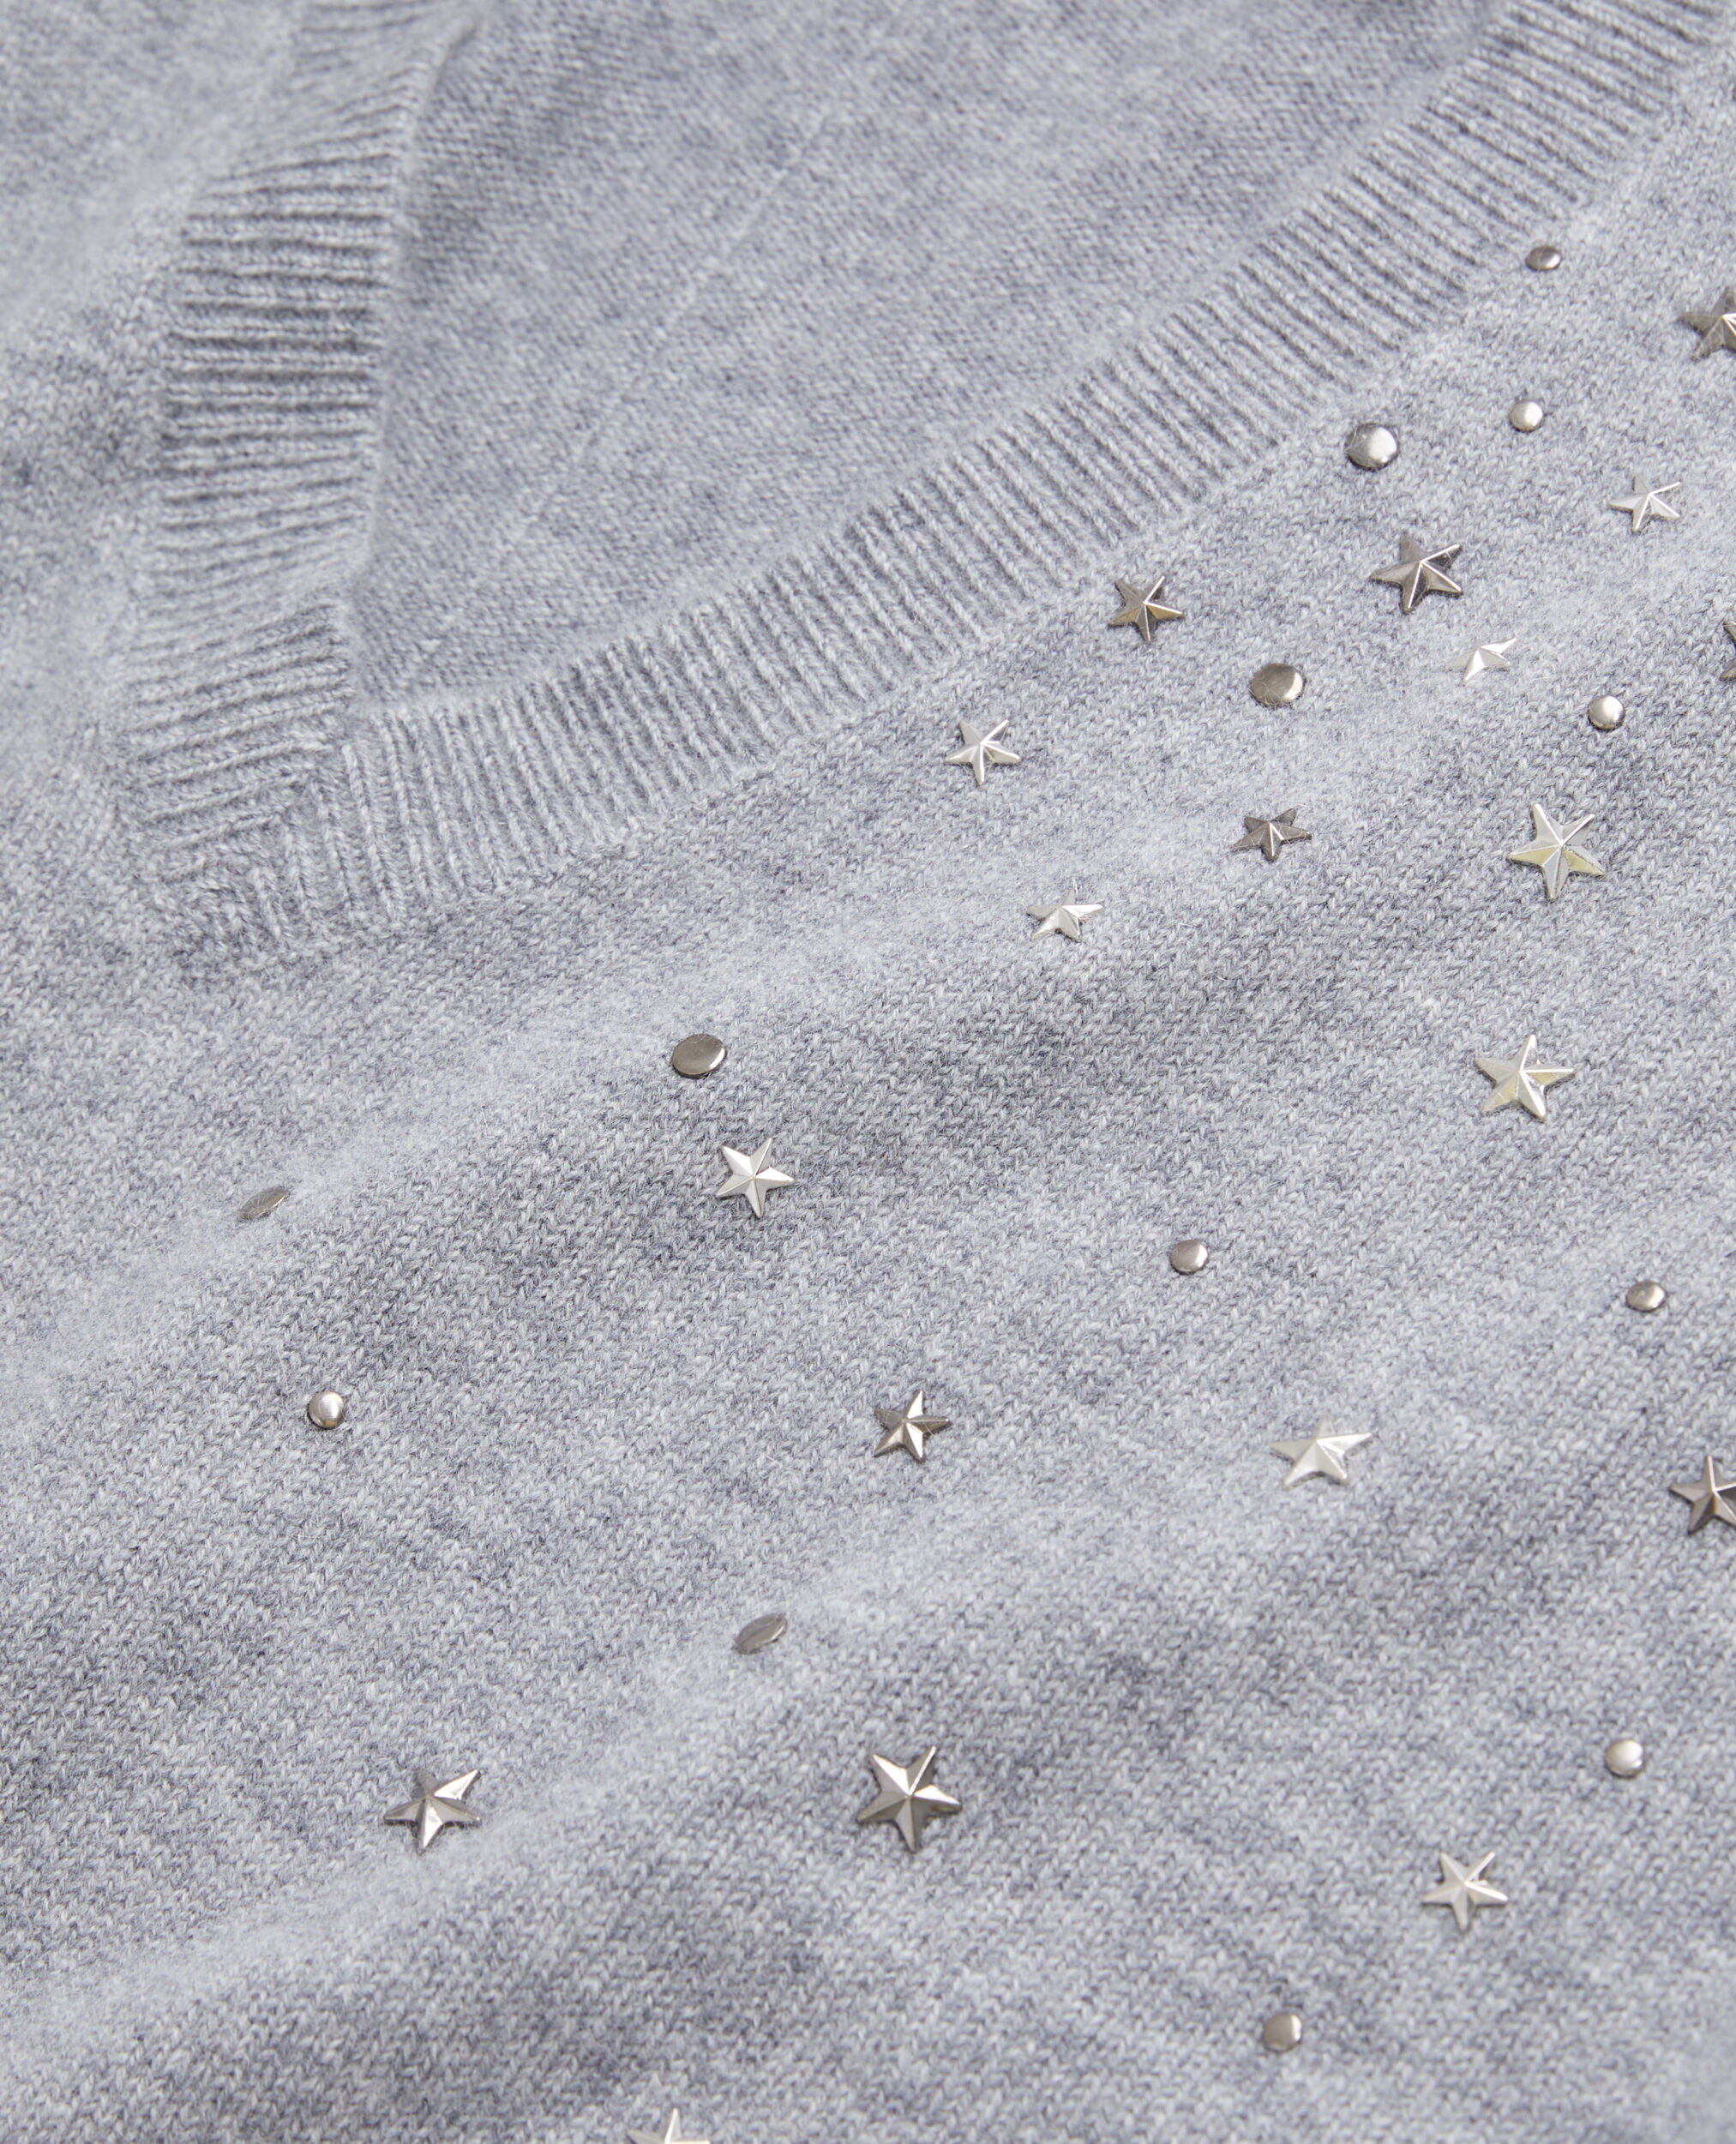 Grey sweater in cashmere-blend with stars, MIDDLE GREY MEL, hi-res image number null